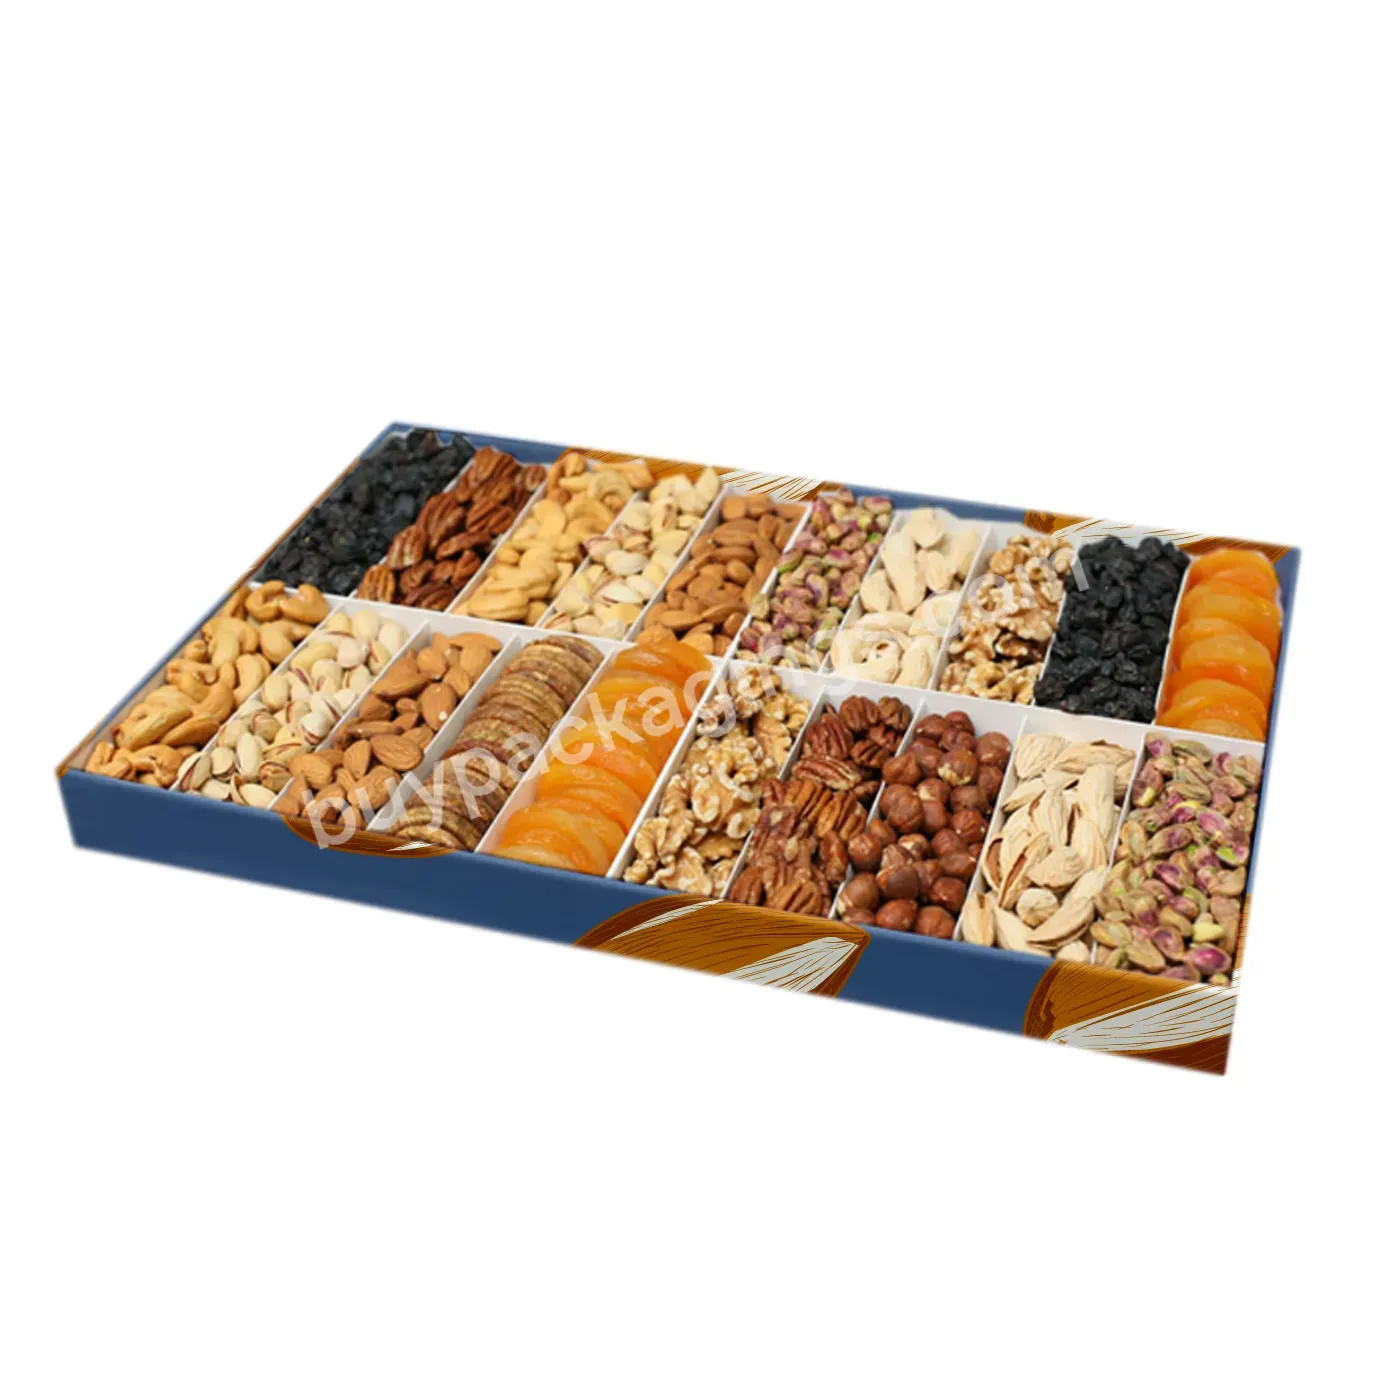 Custom Luxury Gold Middle East Baklava Dates Gift Box Cardboard Nut Packing Nut Giftb Paper Box For Nut - Buy Cute Box For Dry Fruit And Nuts,Valentines Day Gift Boxes,Paper Nut Box.